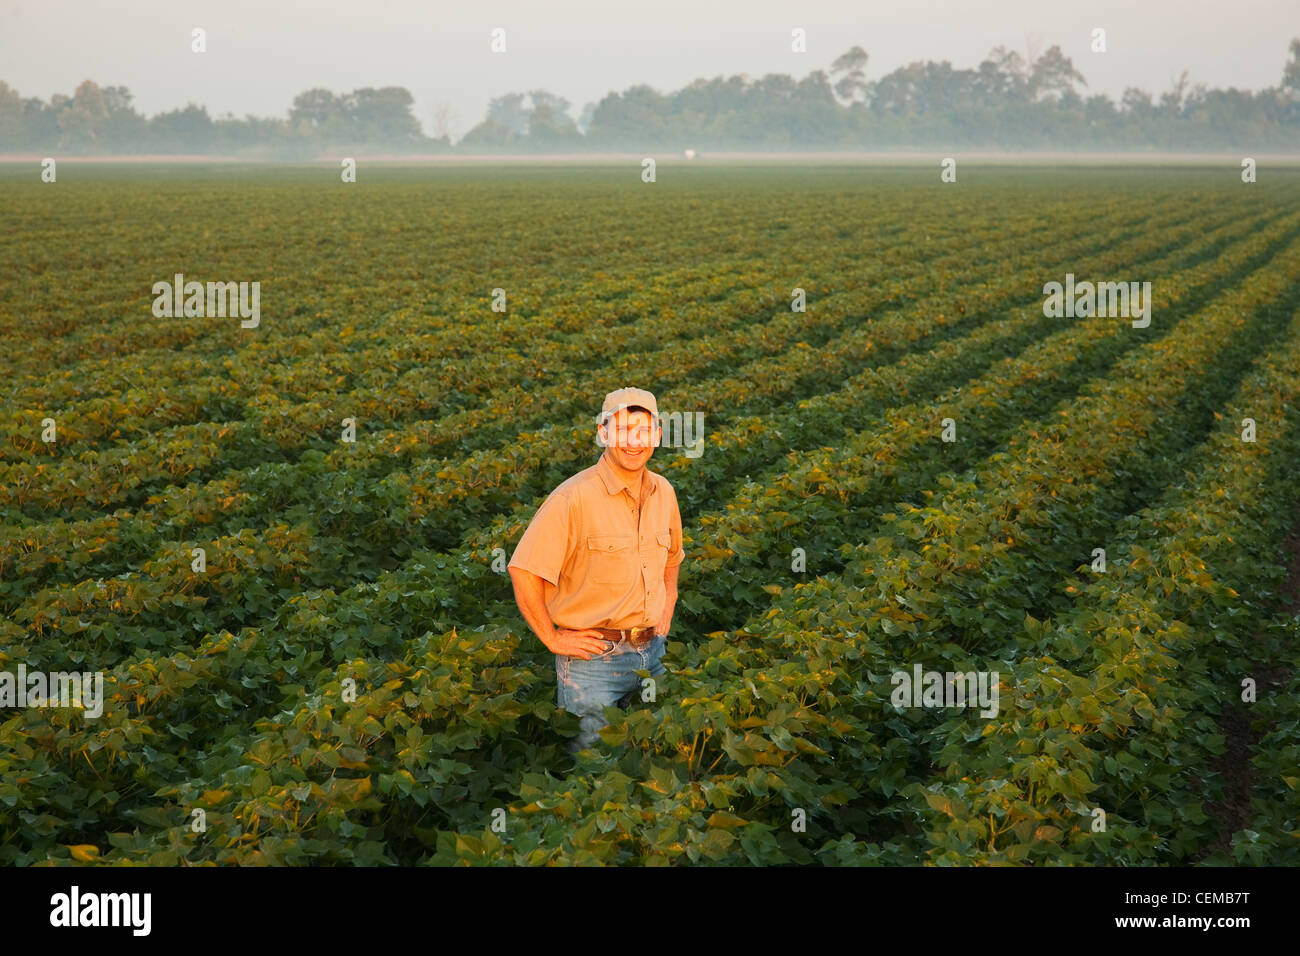 A farmer (grower) standing and inspecting his mid growth late boll set stage cotton crop in hazy early morning light / Arkansas. Stock Photo